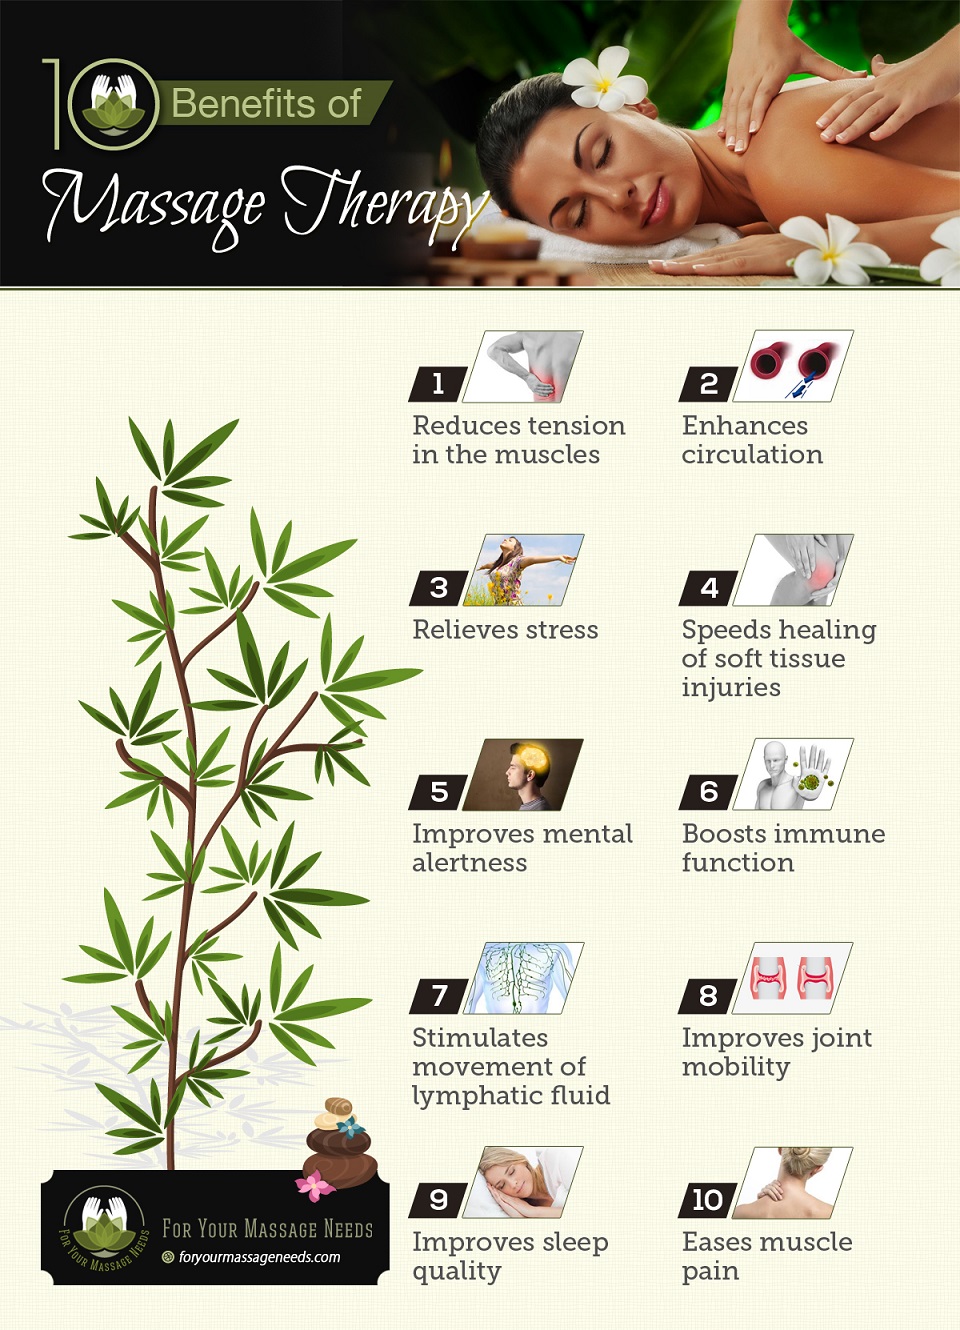 10 Health Benefits of Massage Therapy infographic